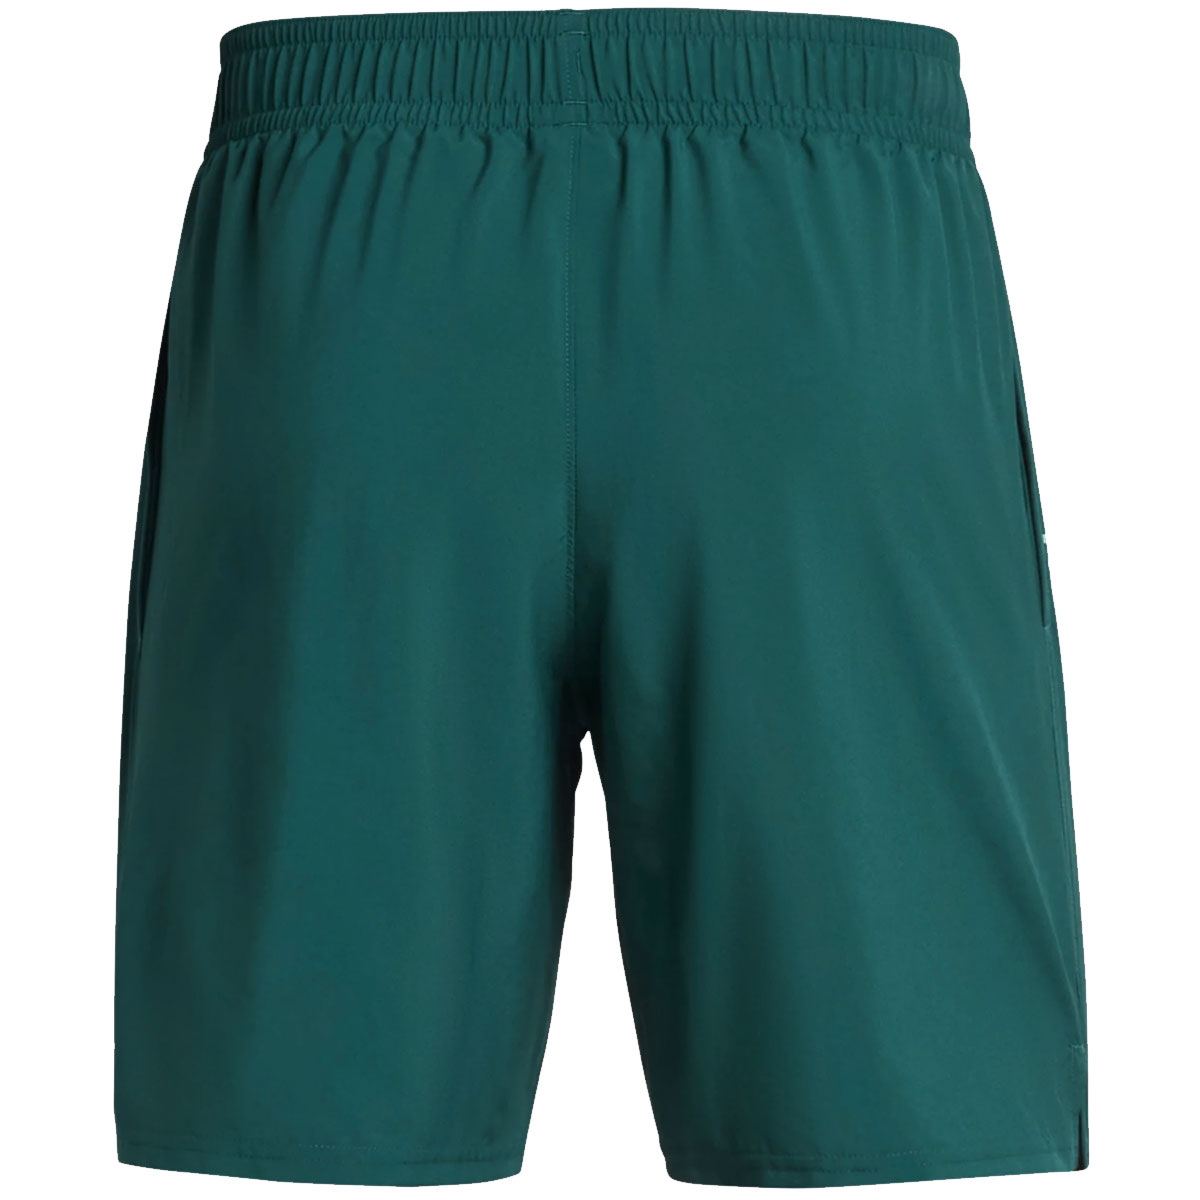 Under Armour Woven Woodmark Shorts - Mens - Hydro Teal/Radial Turquoise